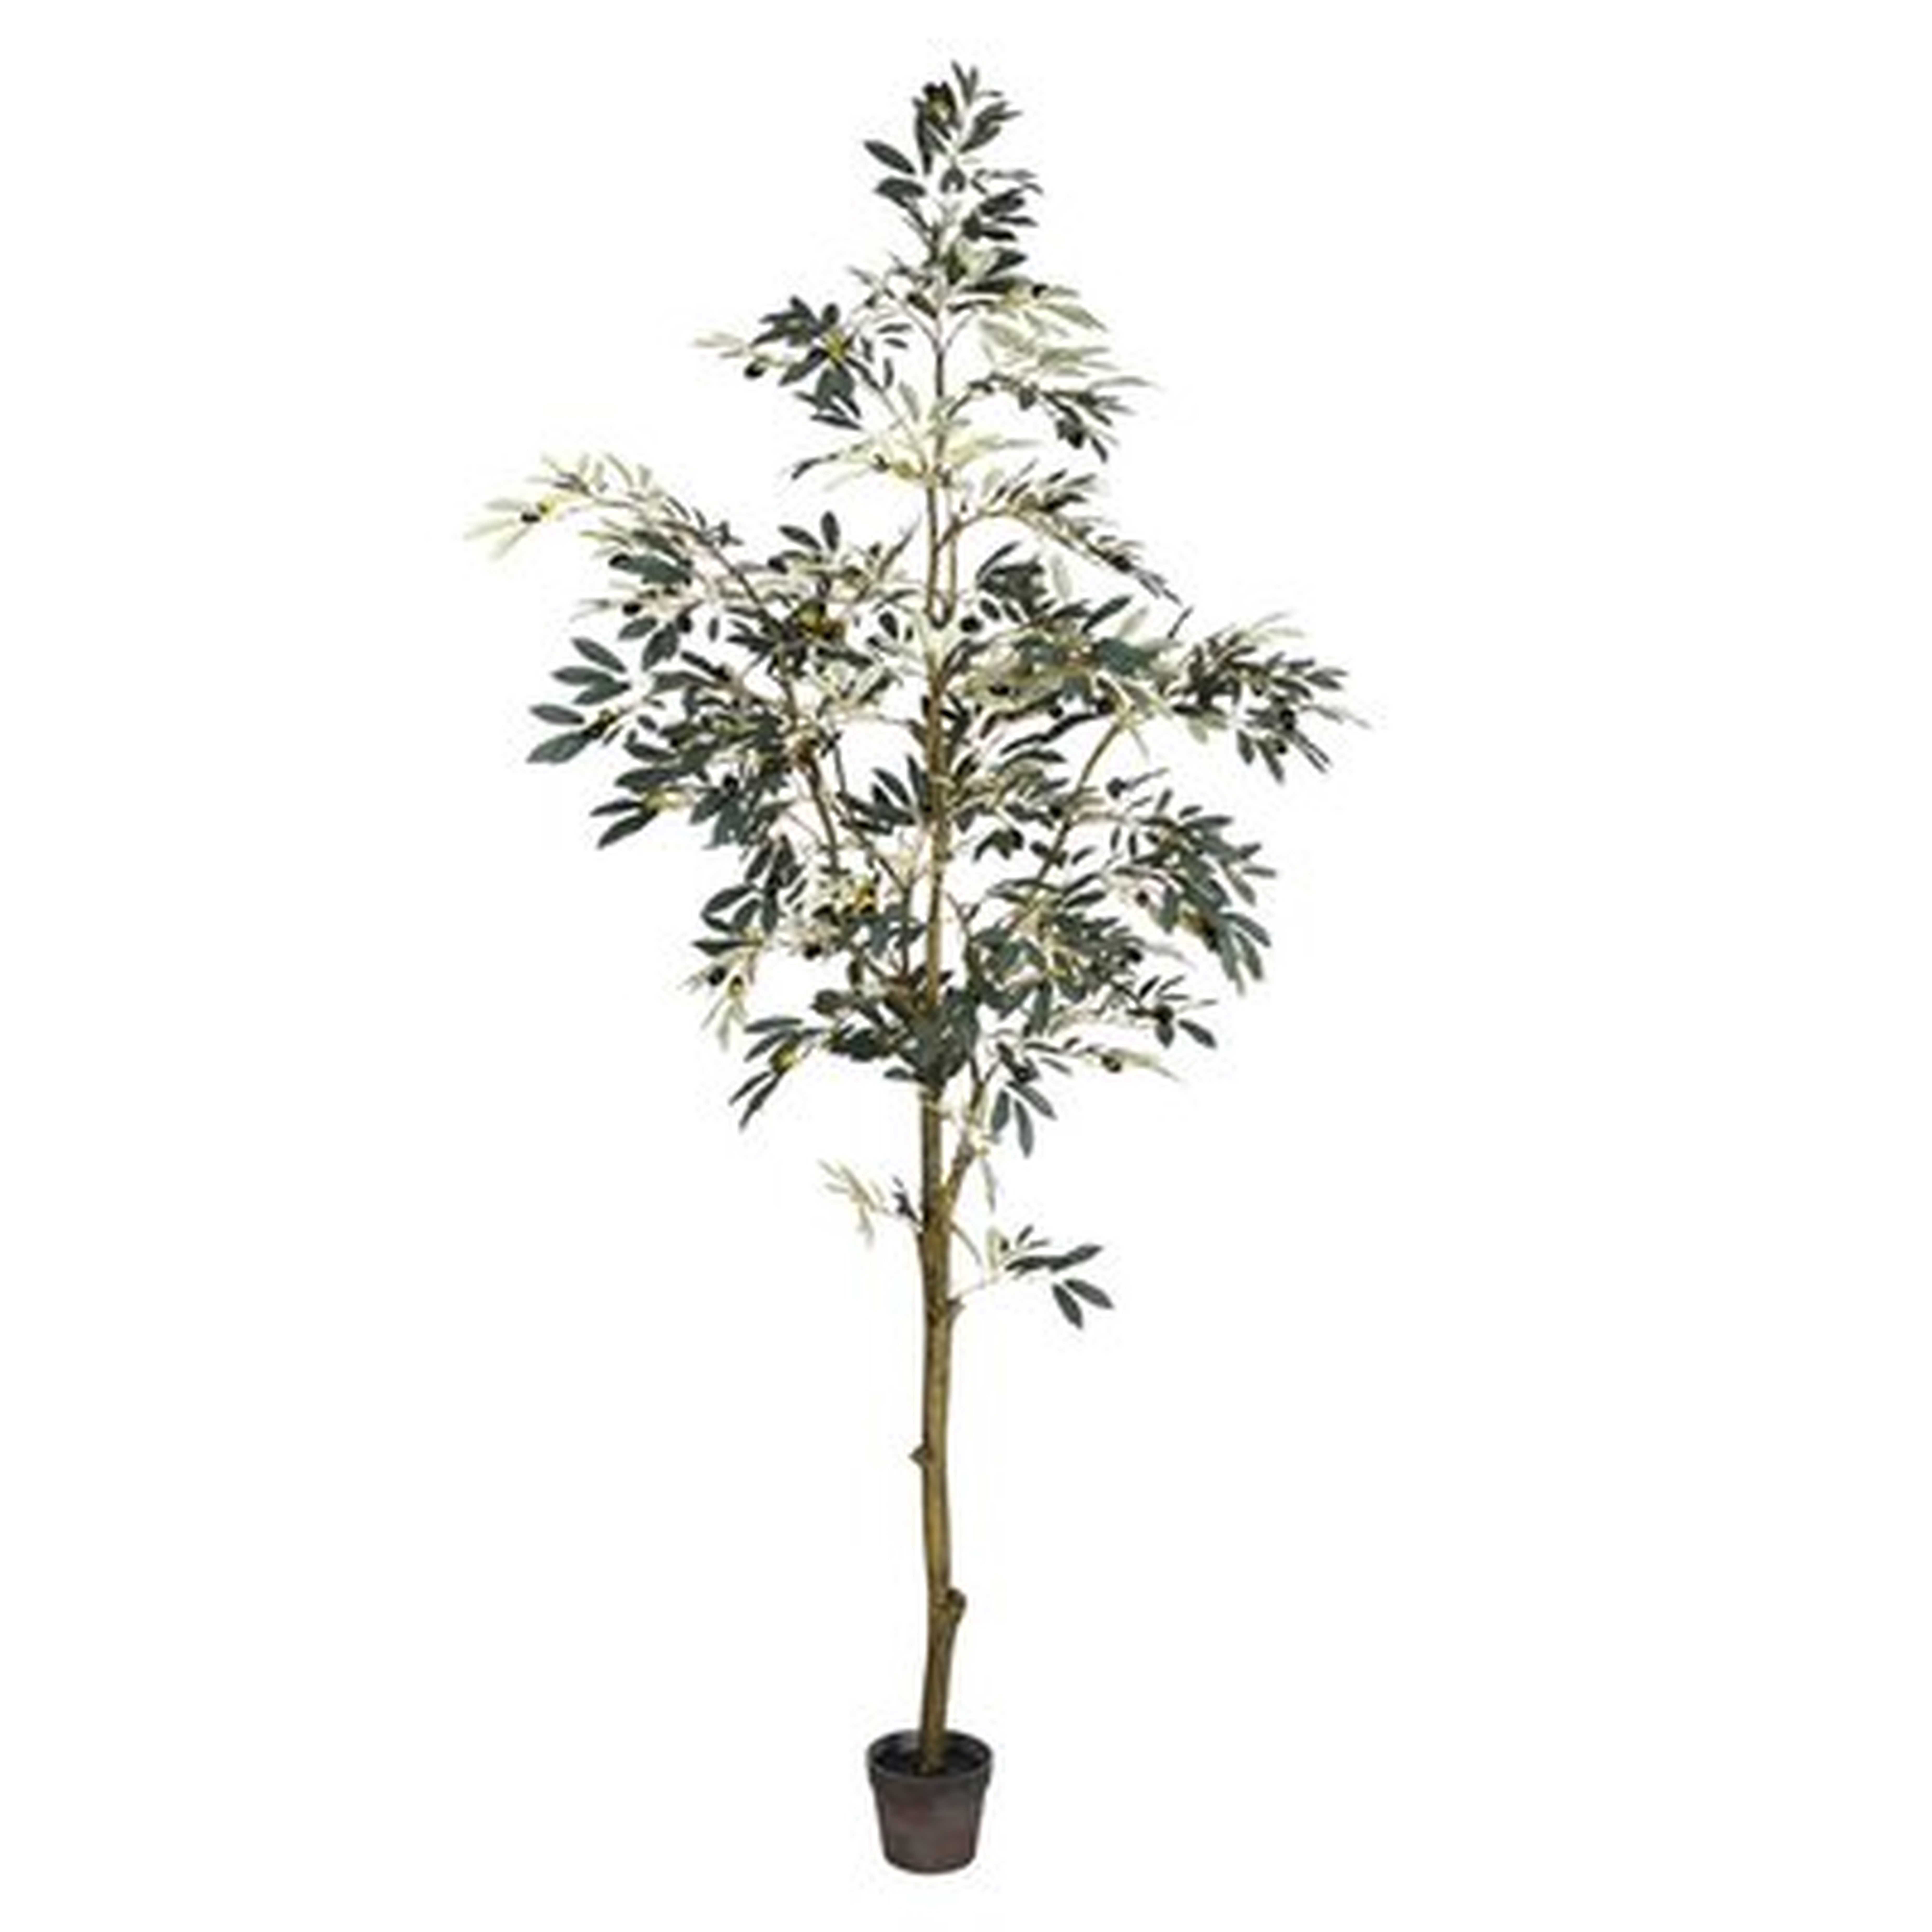 84" Faux Potted Olive Floor Foliage Tree in Pot - Wayfair